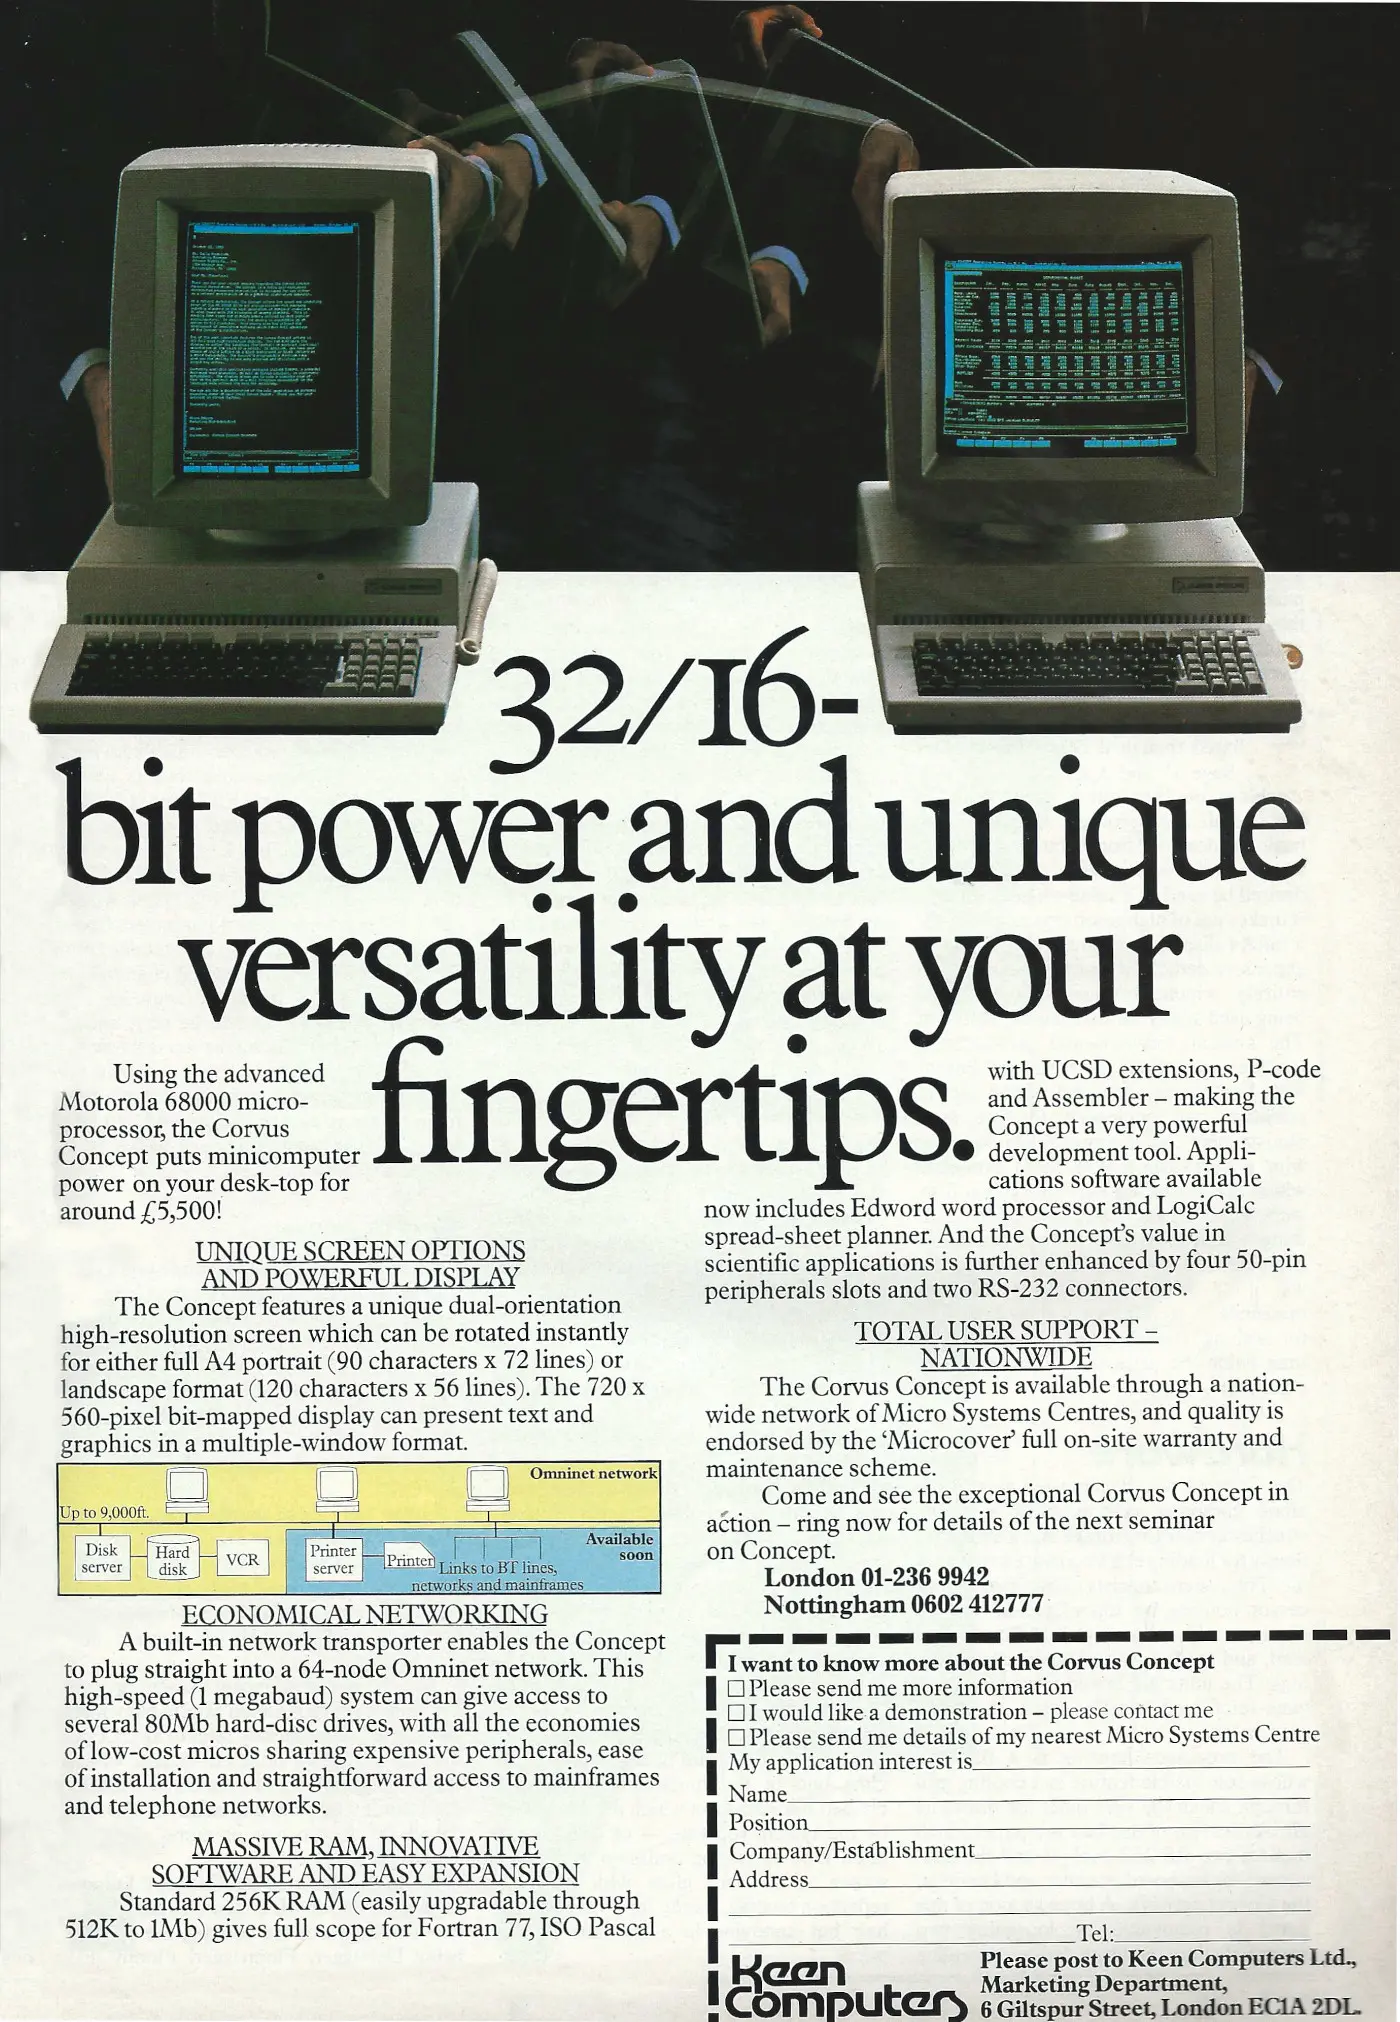 Corvus Advert: 32/16-bit power and unique versatility at your fingertips, from Personal Computer World, March 1983